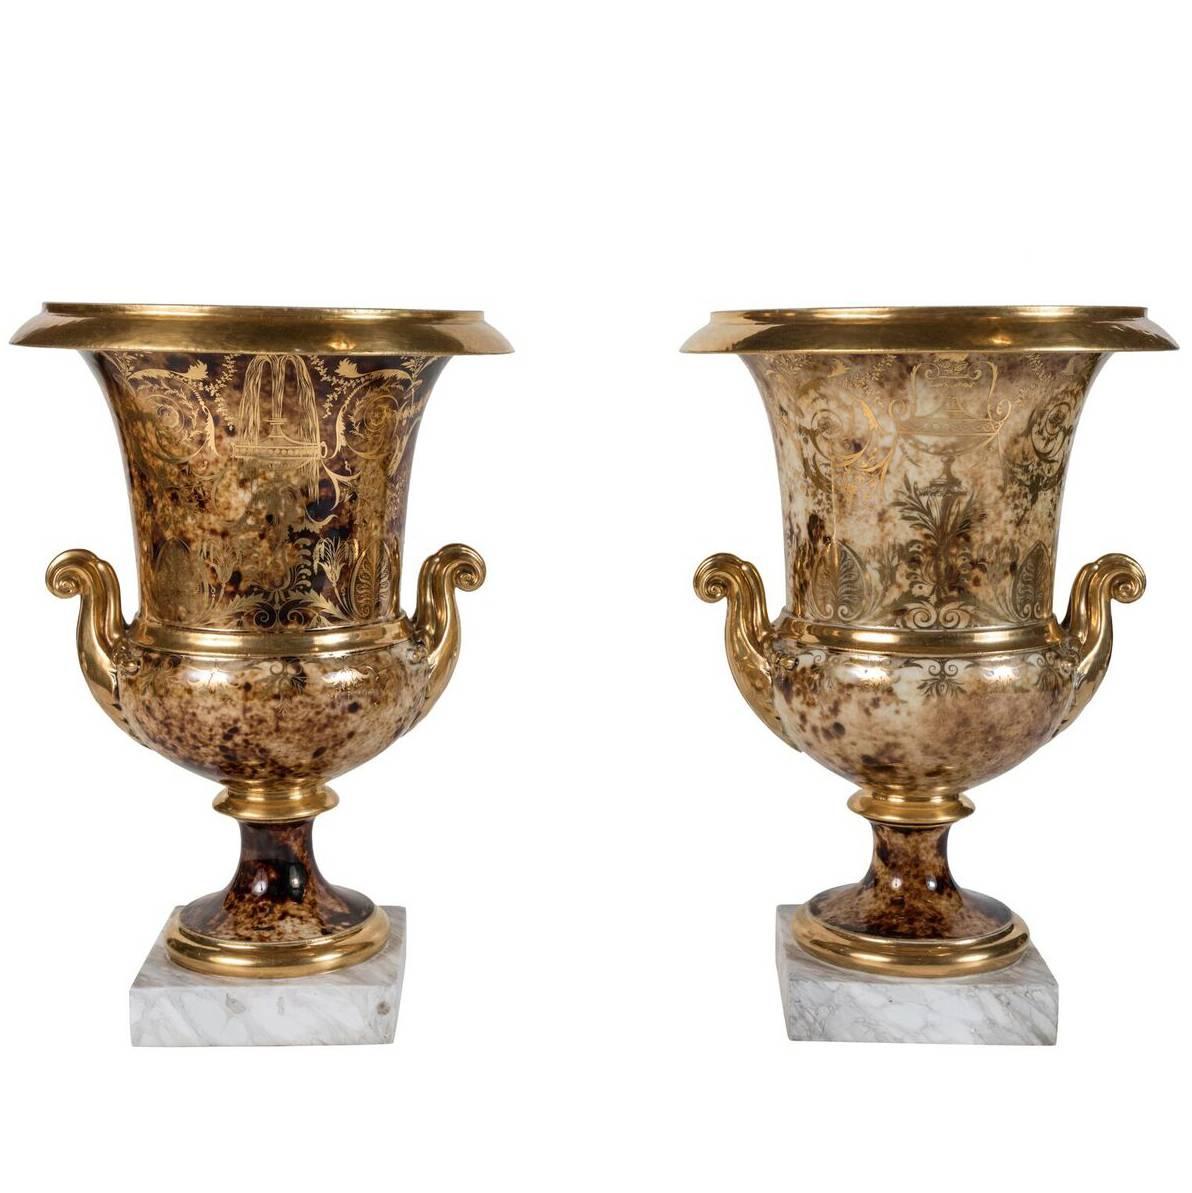 19th Century, Hand-Painted Porcelain Urns For Sale